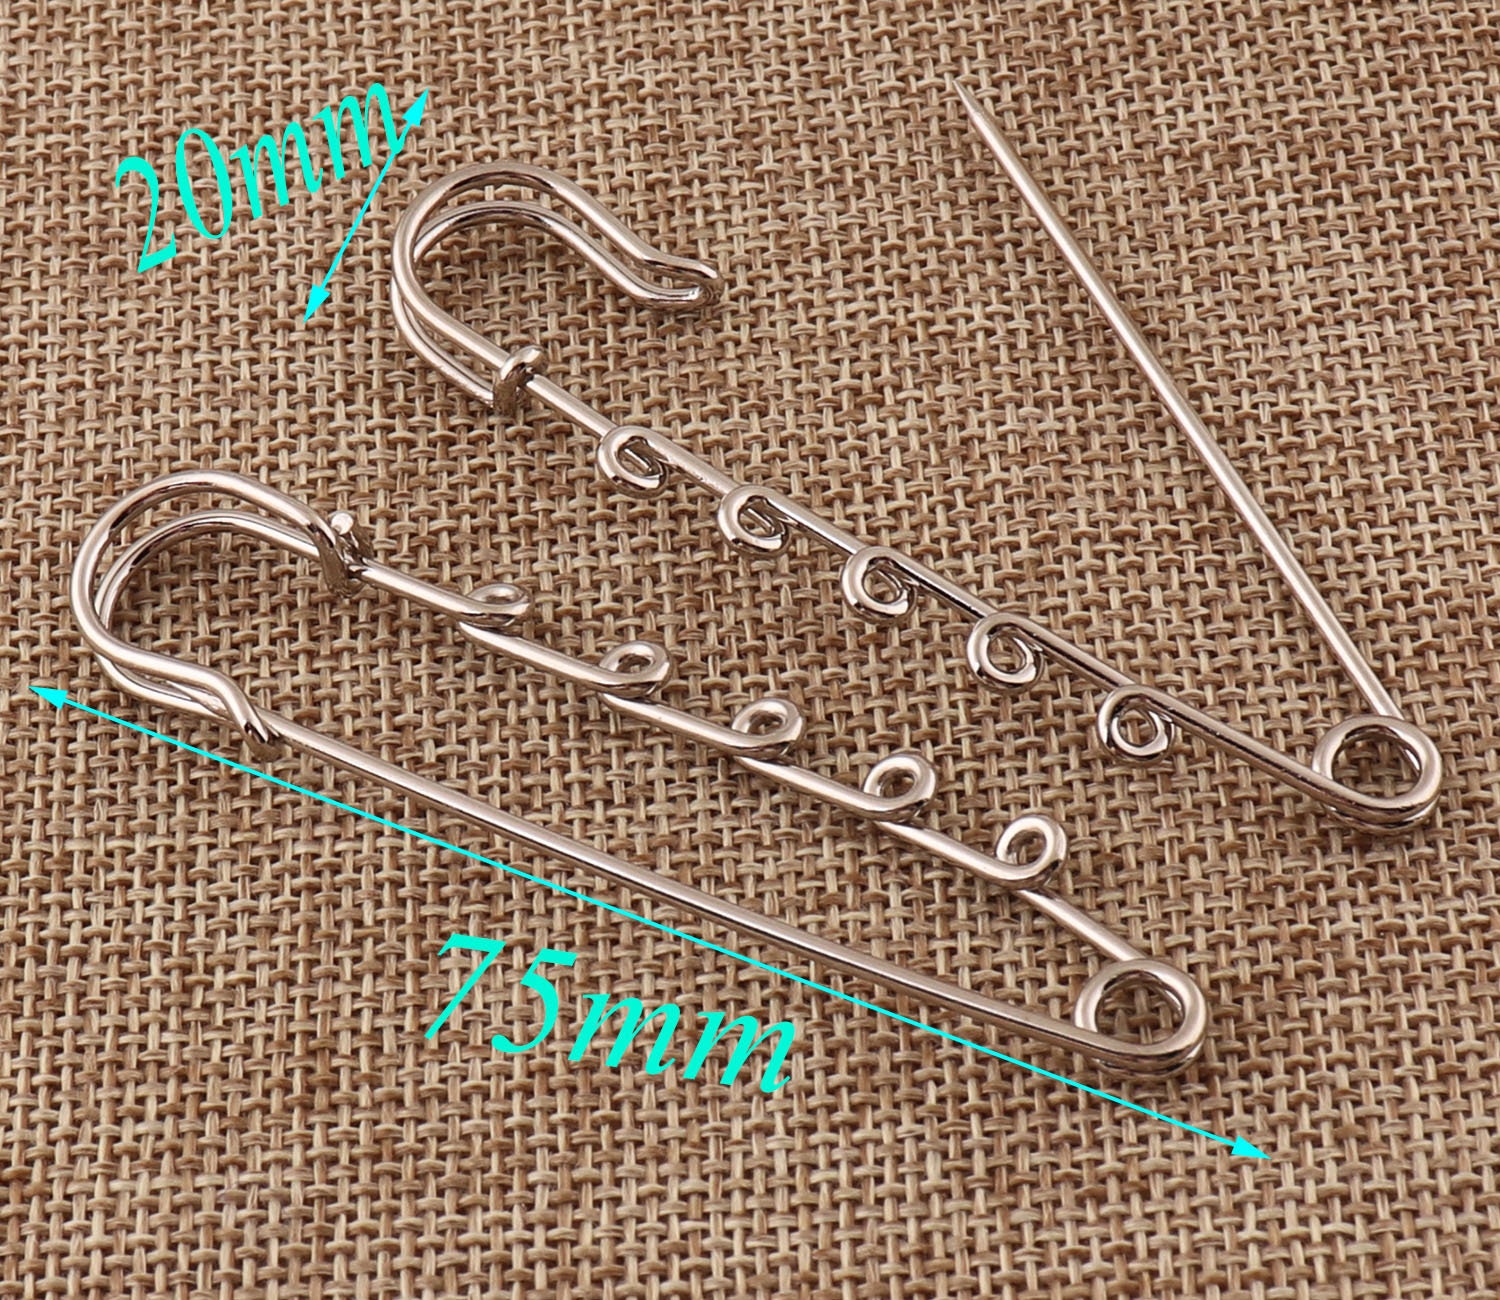 1-1/2 Silver Coiless Safety Pins, 175pcs - Bead Bee